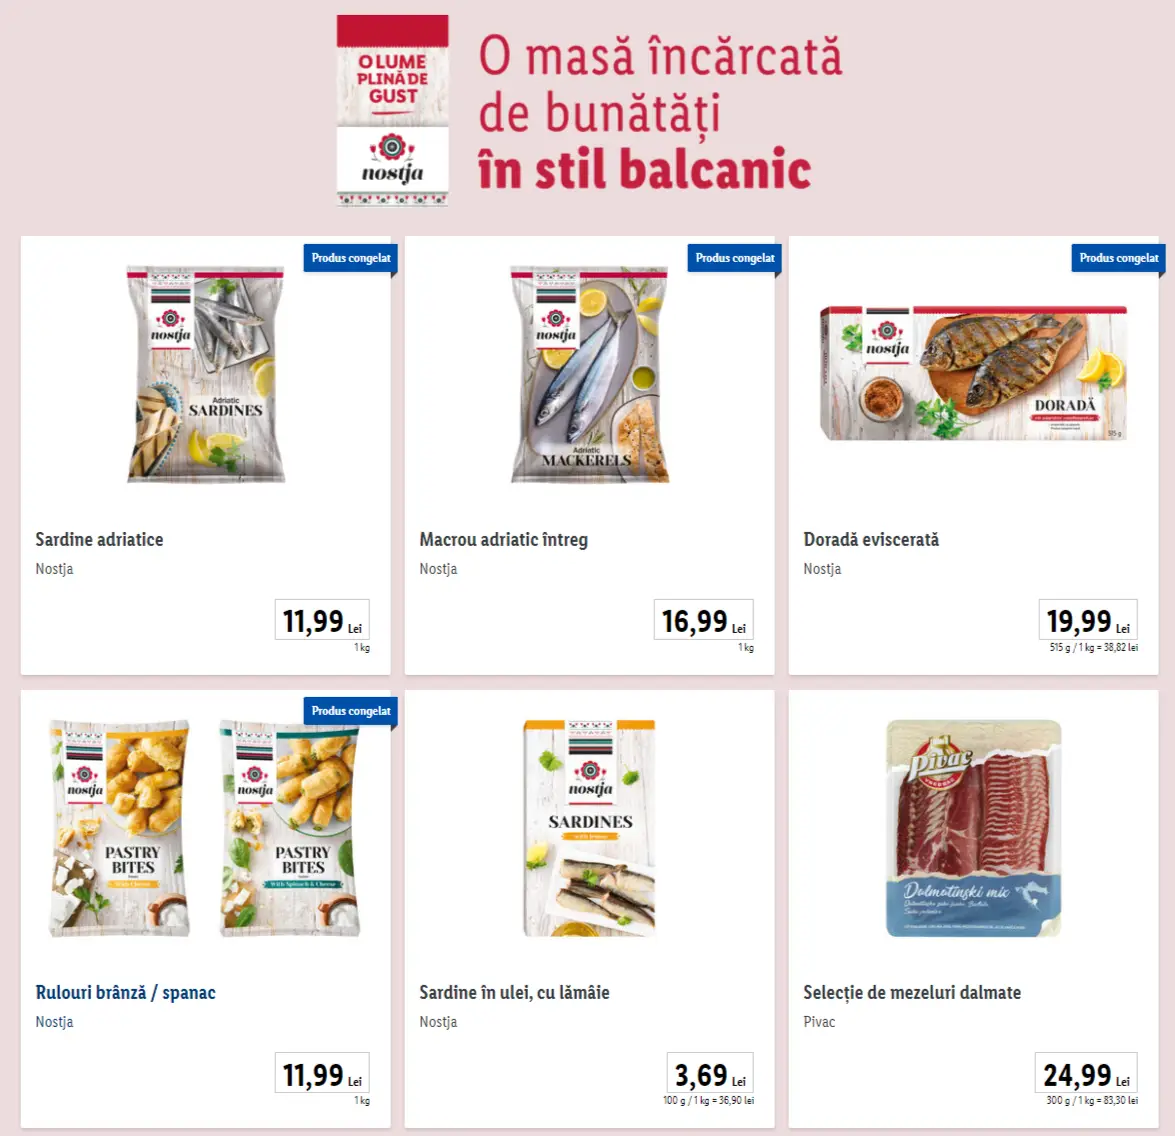 The Special Products that LIDL Romania has in the All Country Balkan Stores